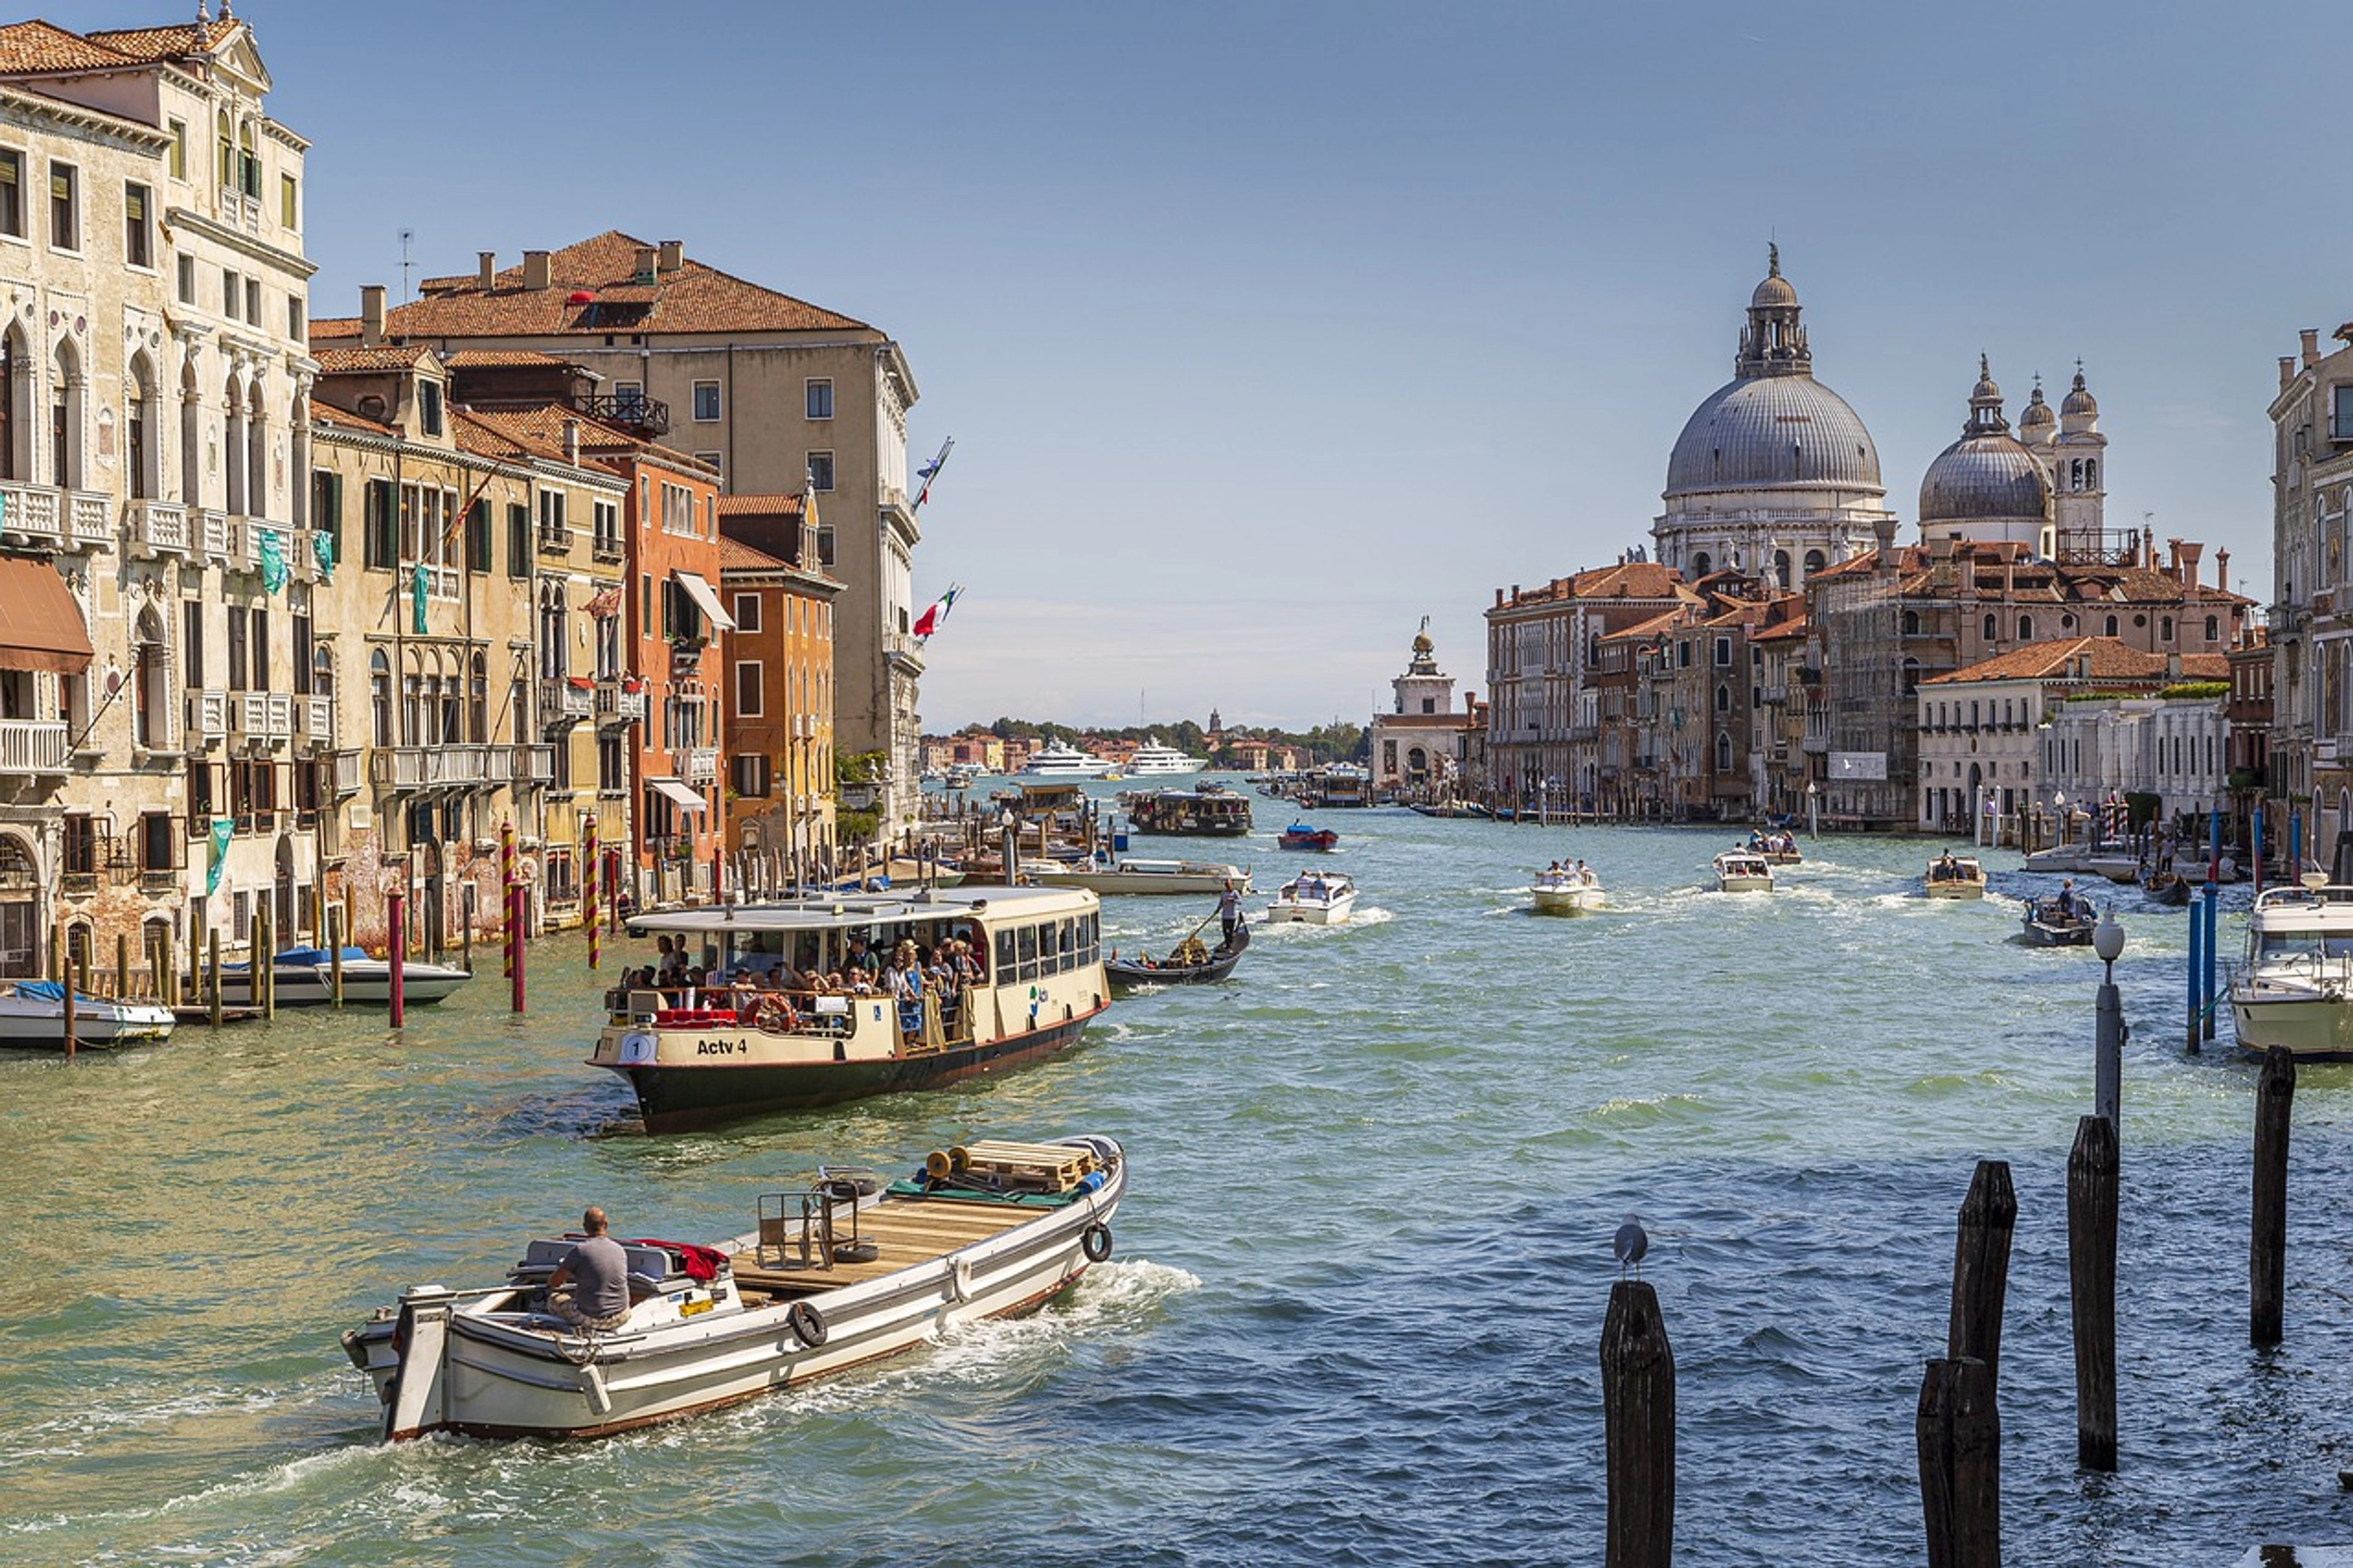 Capture your memories with a photoshoot in Venice